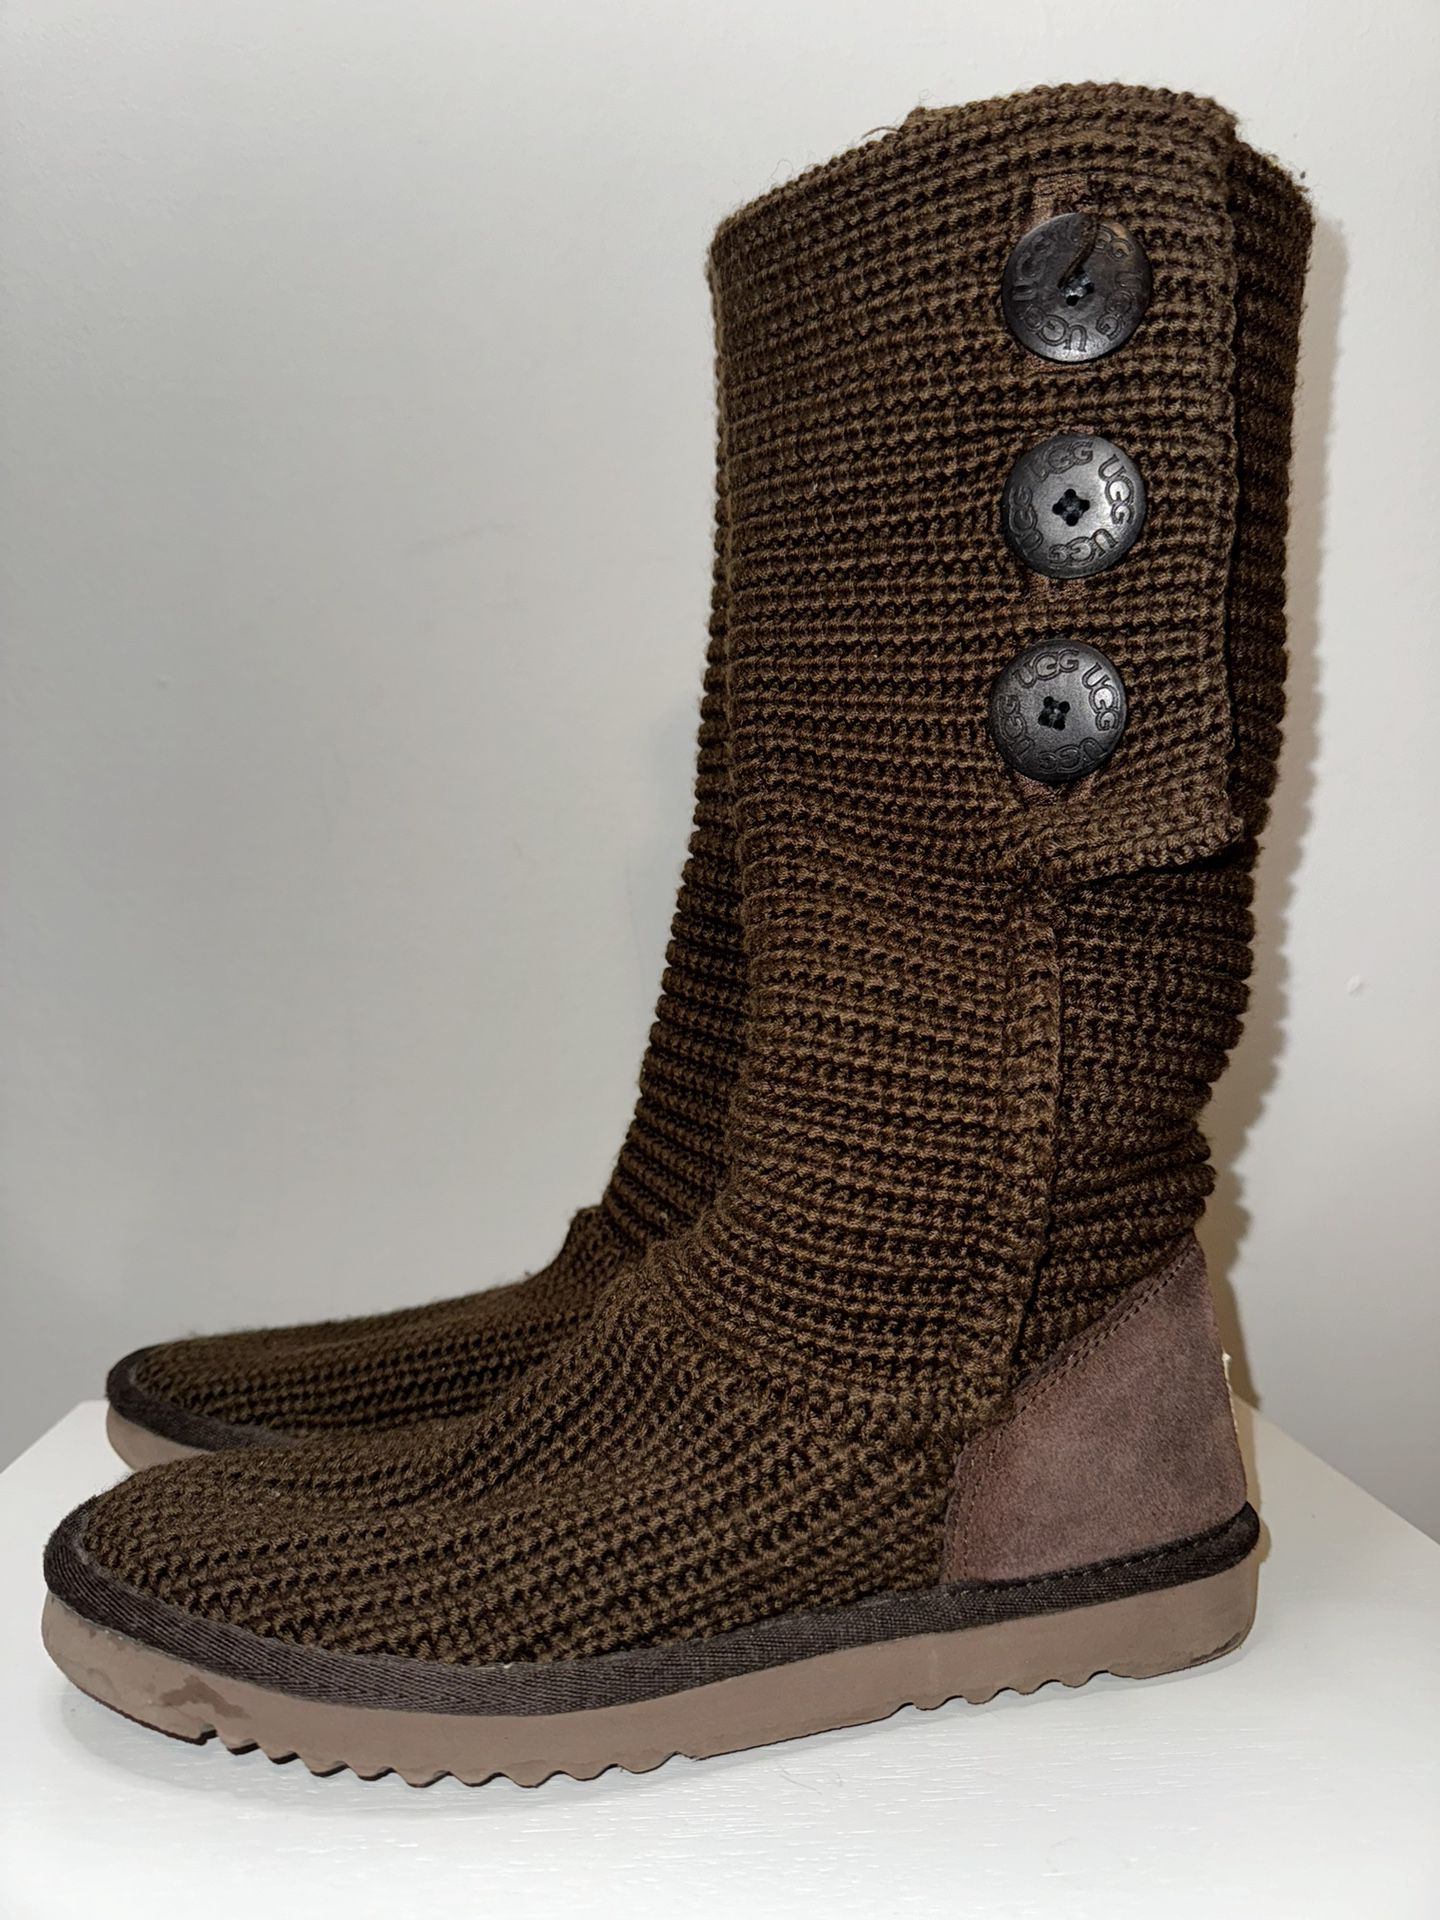 UGGS Sweater Boots 